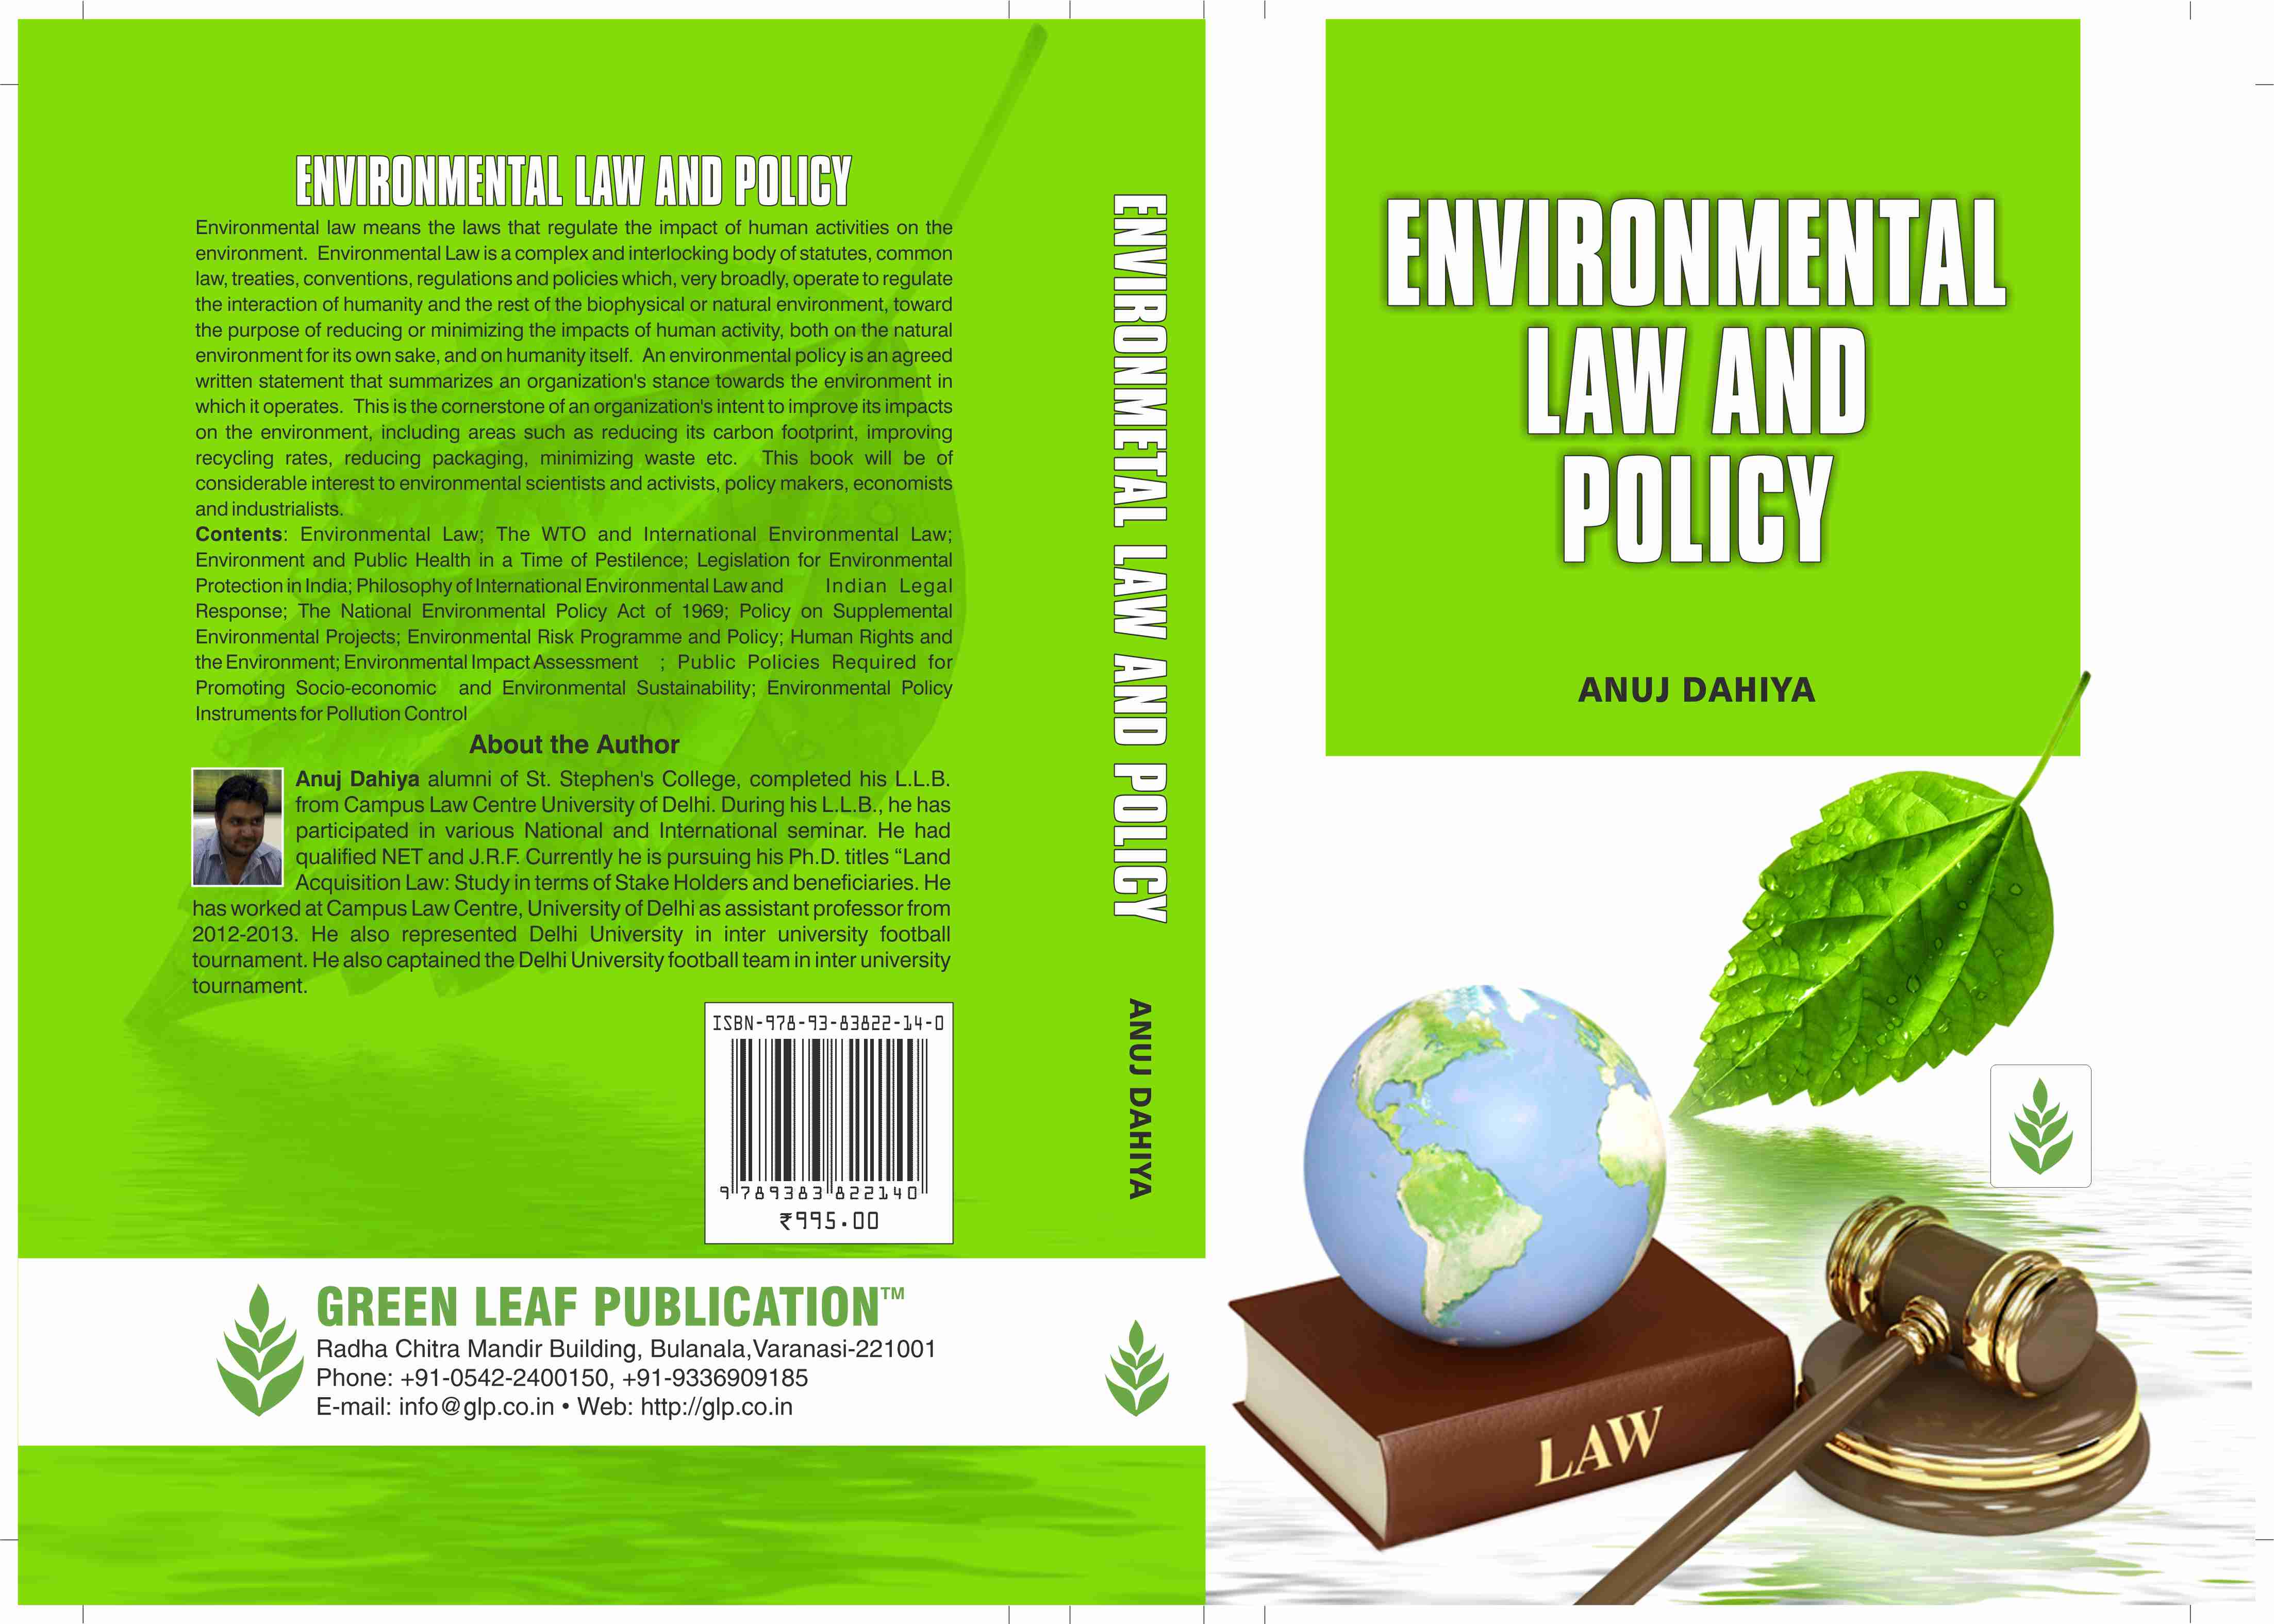 Environmental Law and Policy.jpg